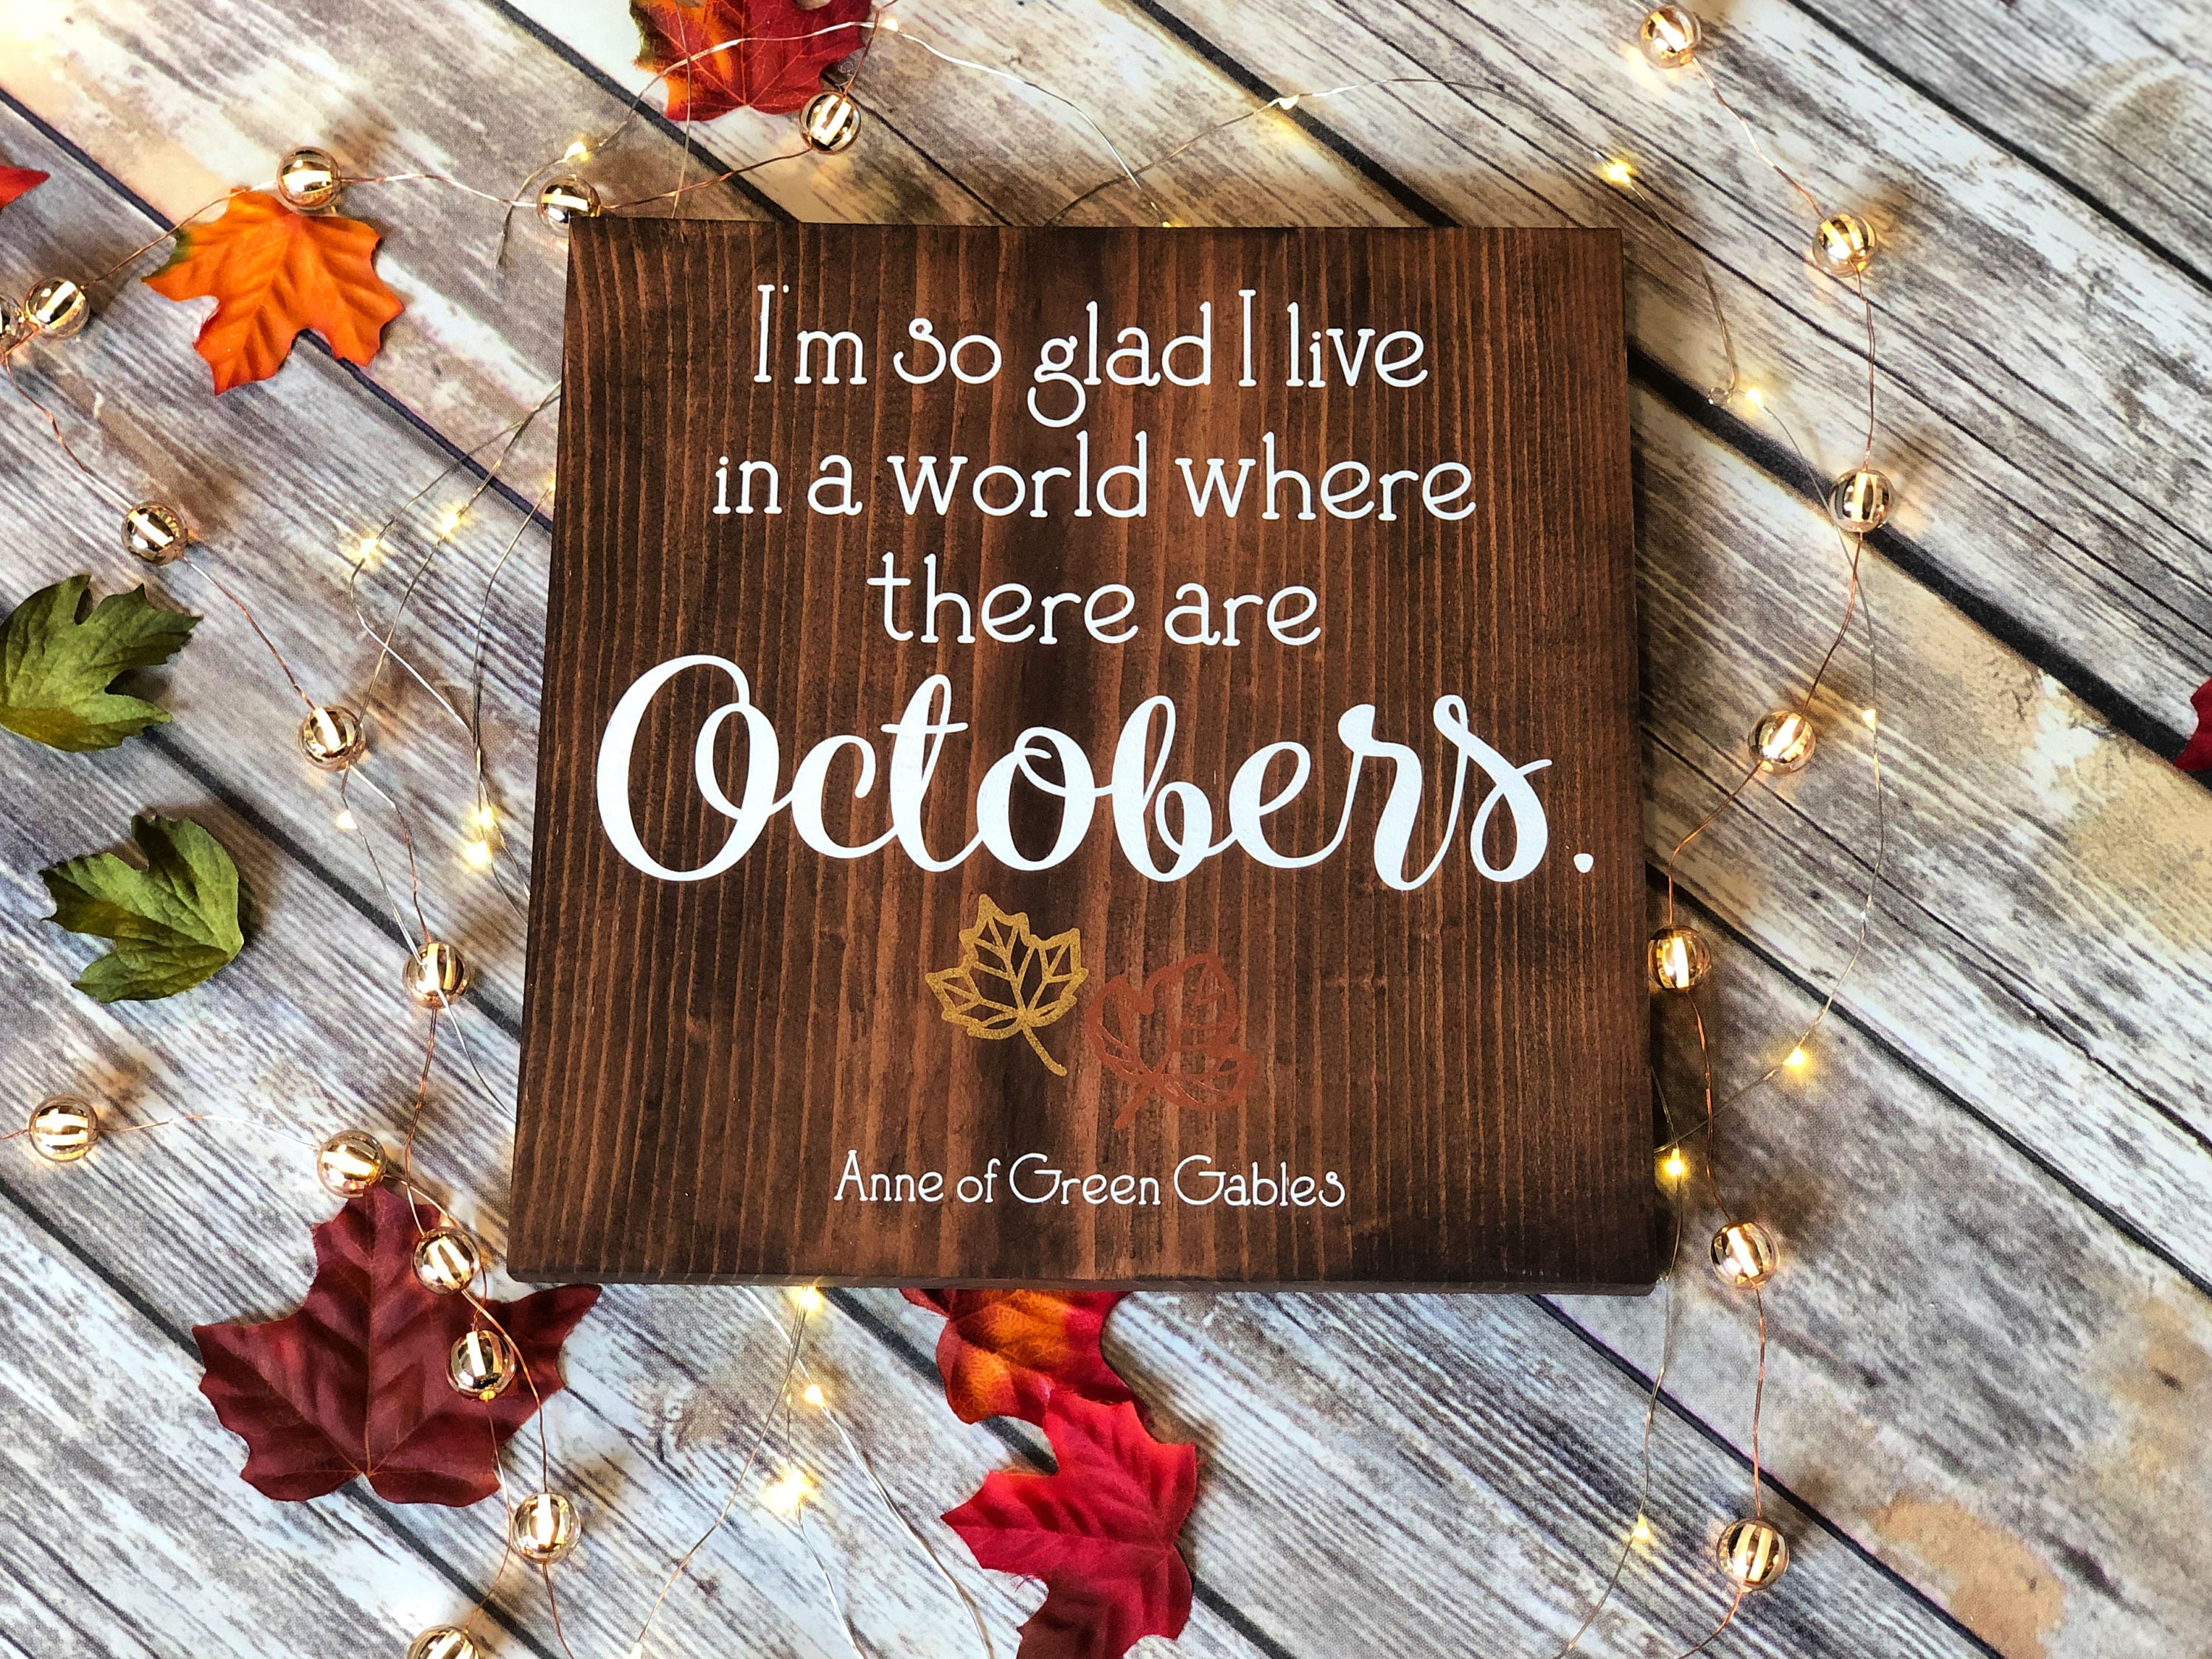 I'm so glad I live in a world where there are Octobers | Etsy